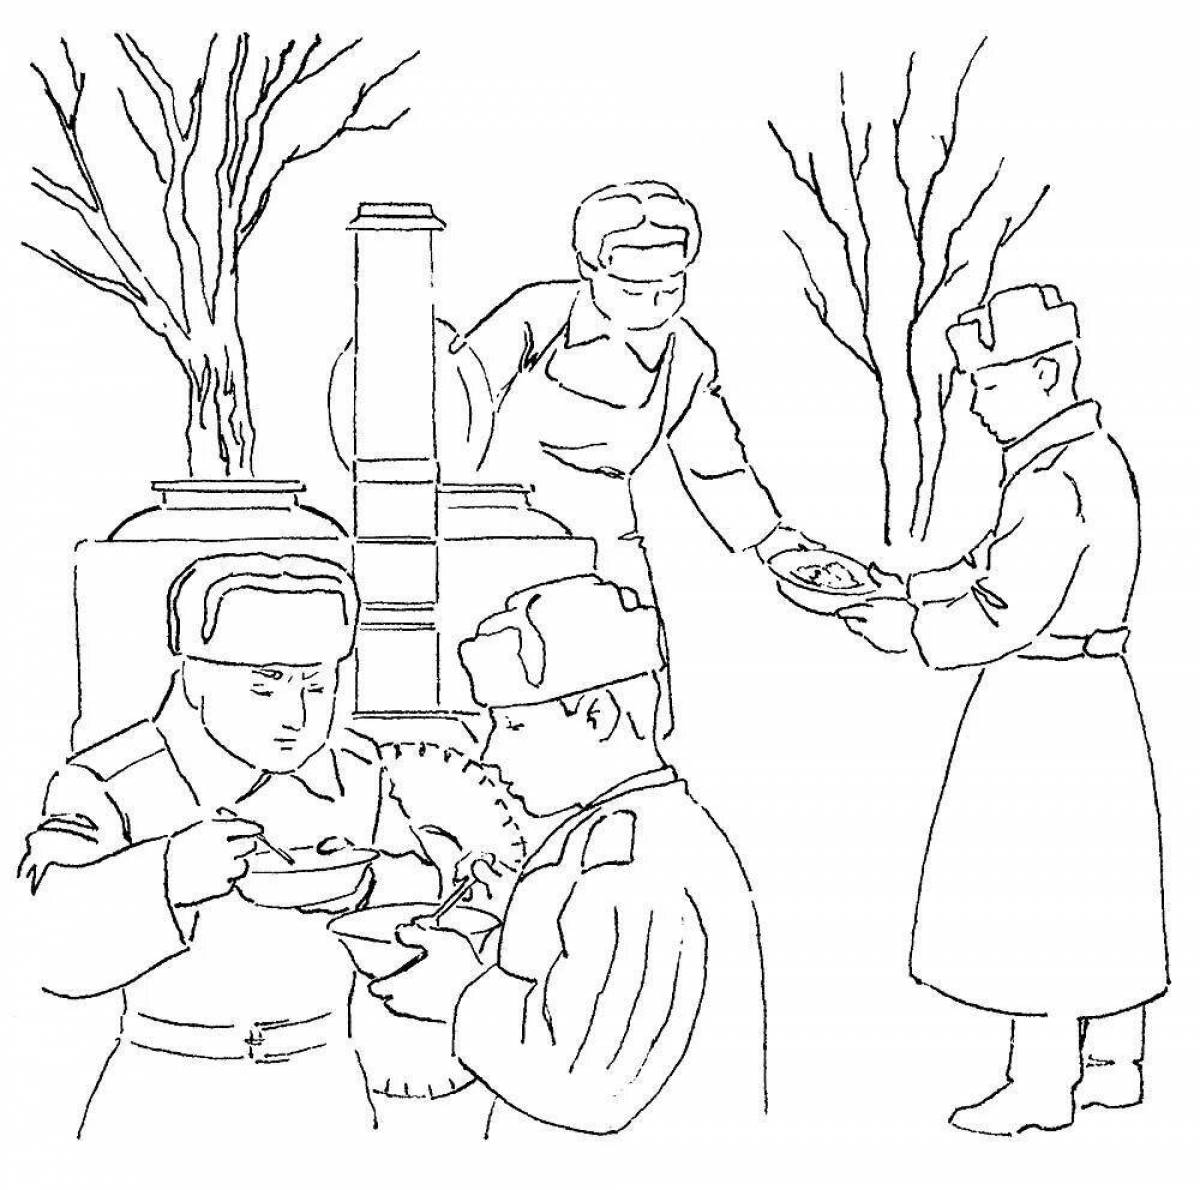 Great soldier and children's coloring book